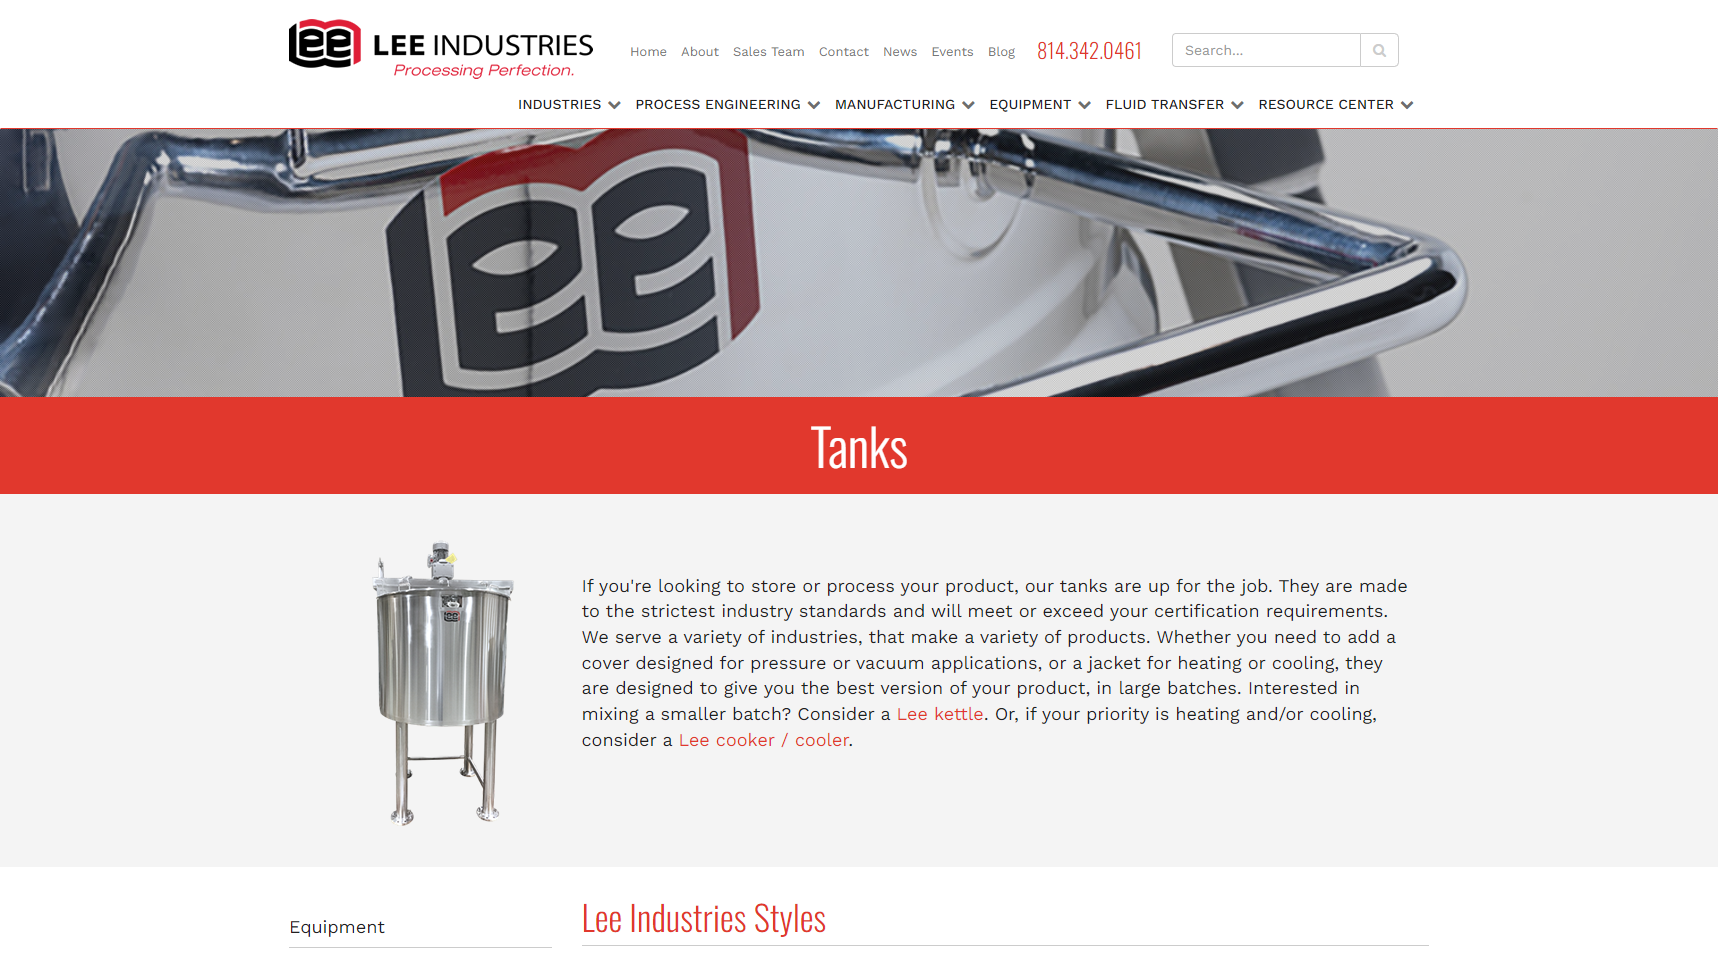 Lee Industries - Chemical Reactor Manufacturer